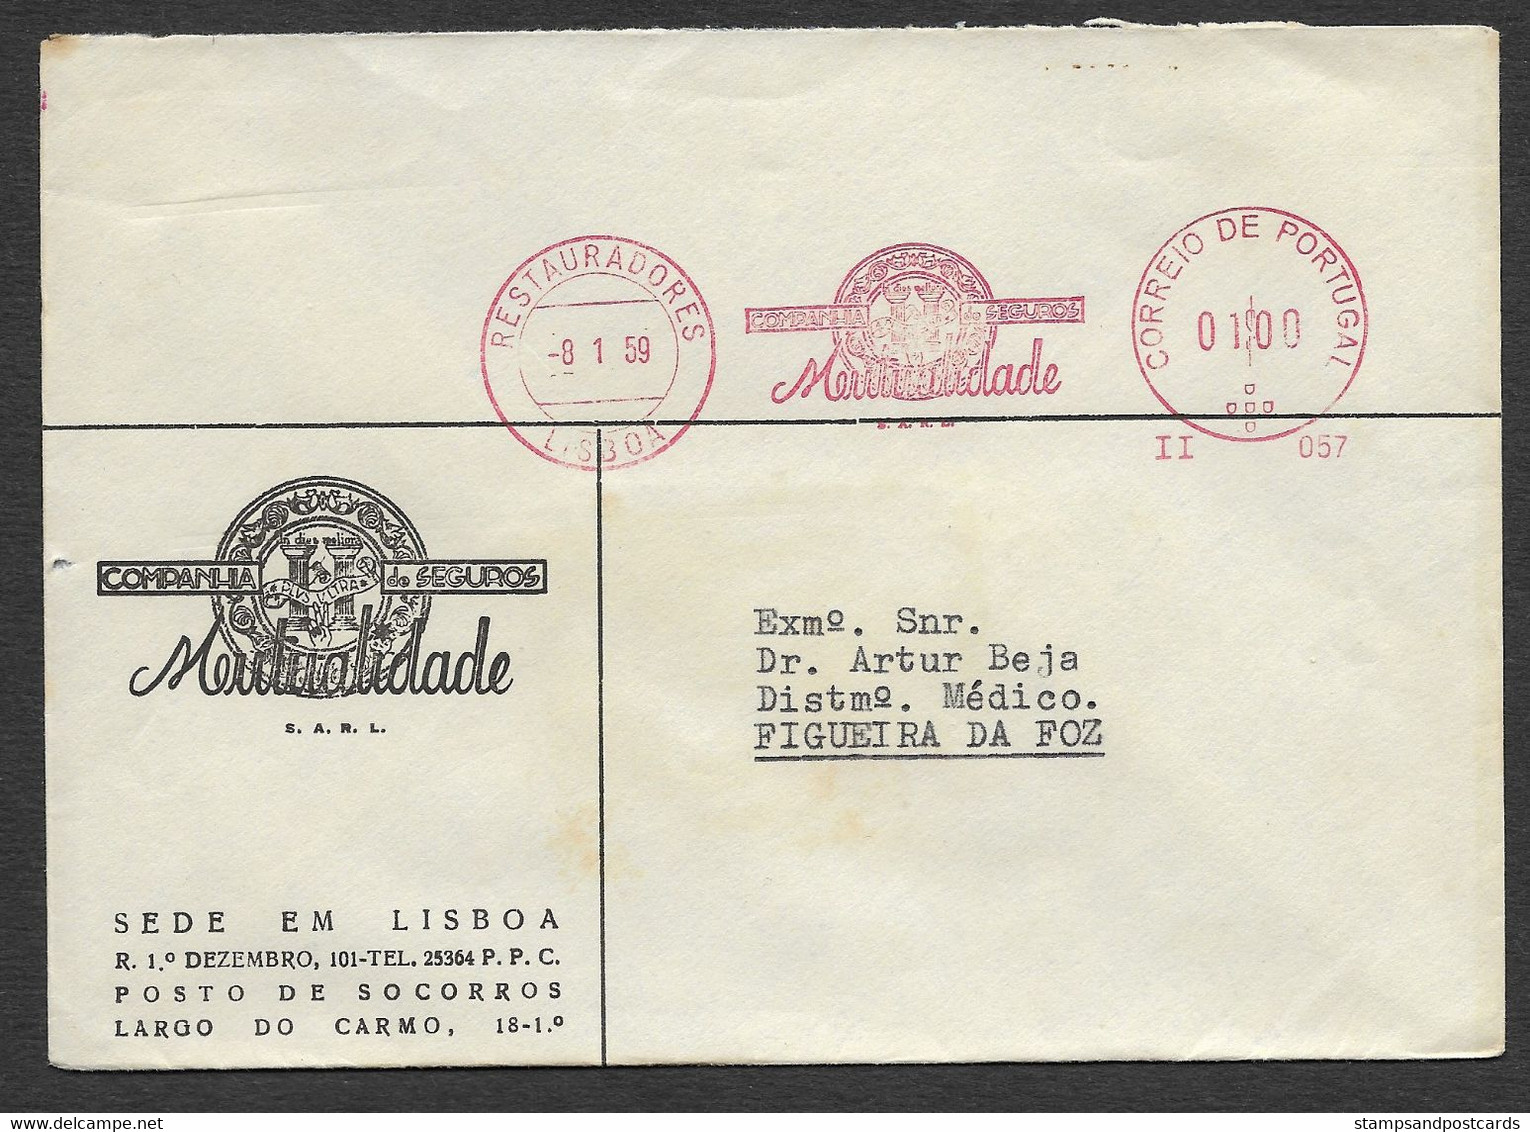 Portugal Lettre Assurance Mutualidade Vignette EMA Cachet Rouge 1959 Cover Cinderella Insurance Co. Franking Meter - Storia Postale